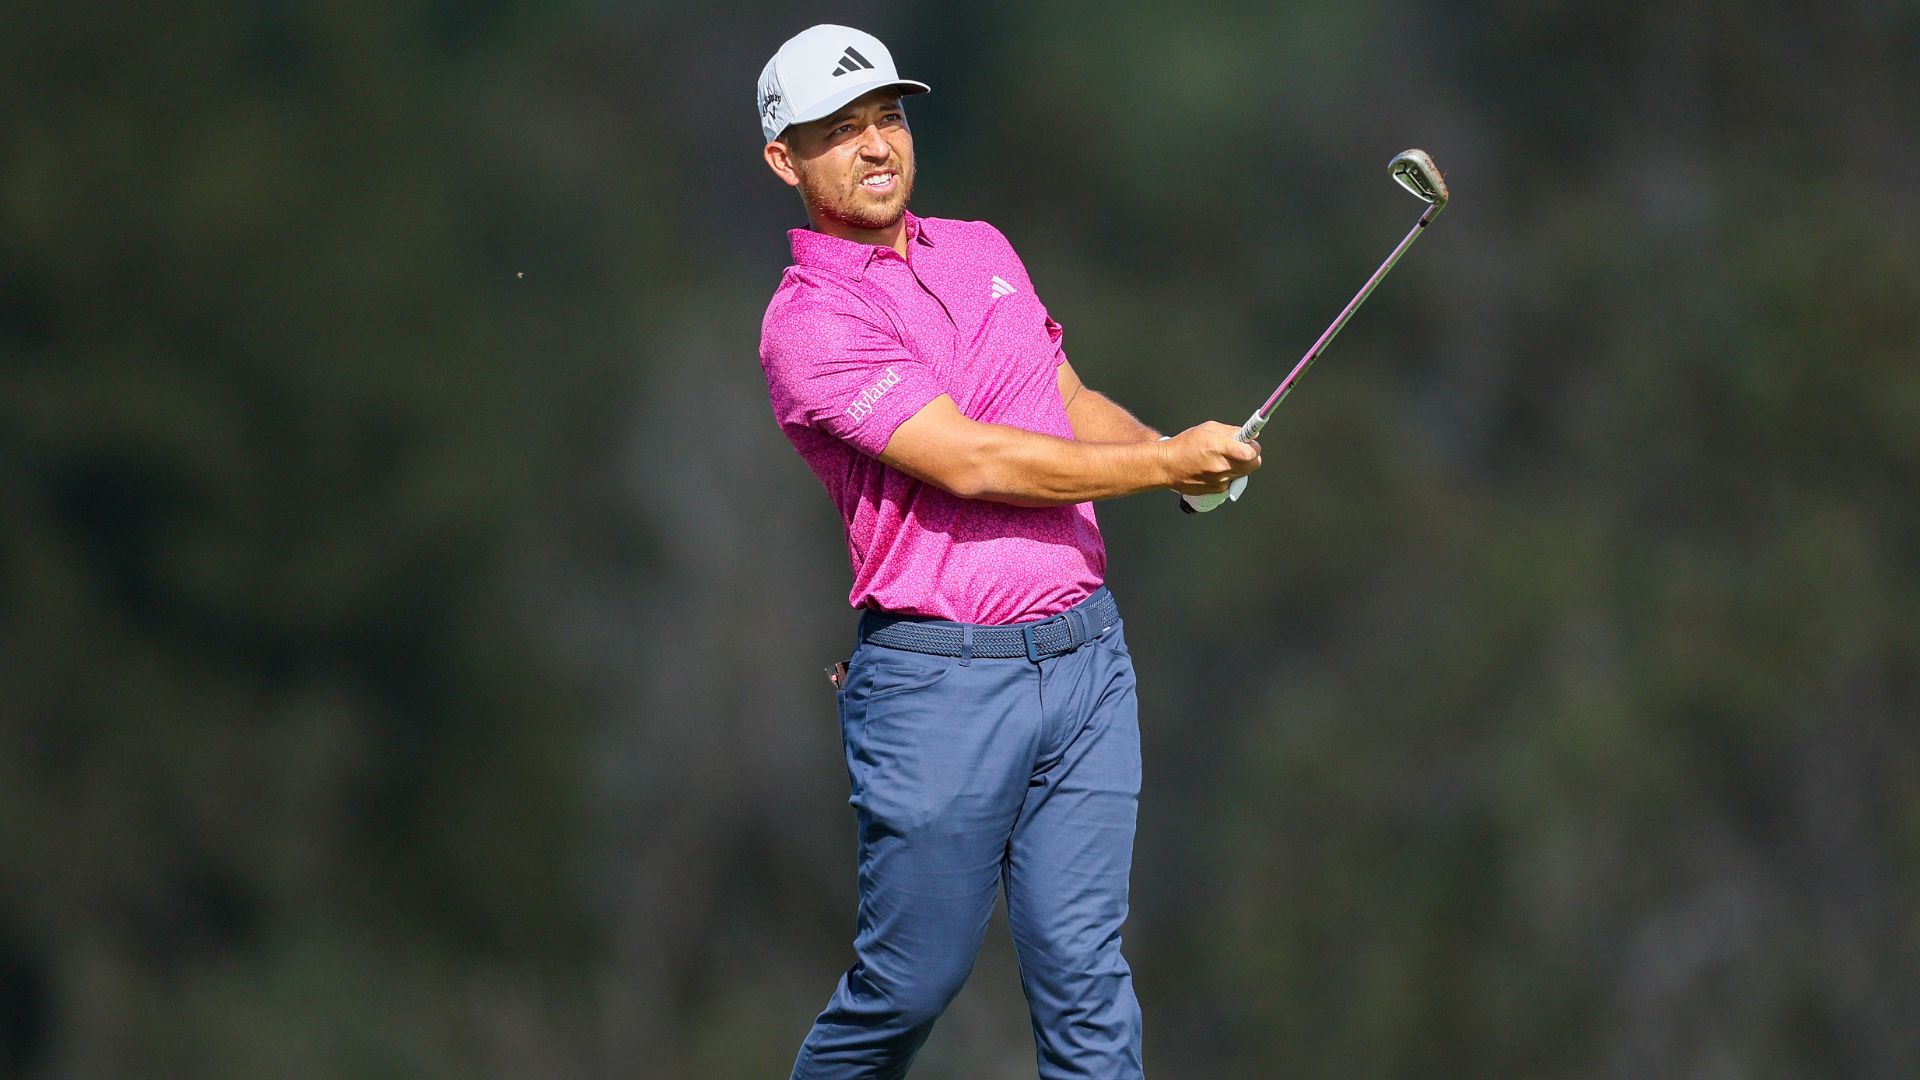 Dealing with nagging back injury, Xander Schauffele WDs from Sentry Tournament of Champions